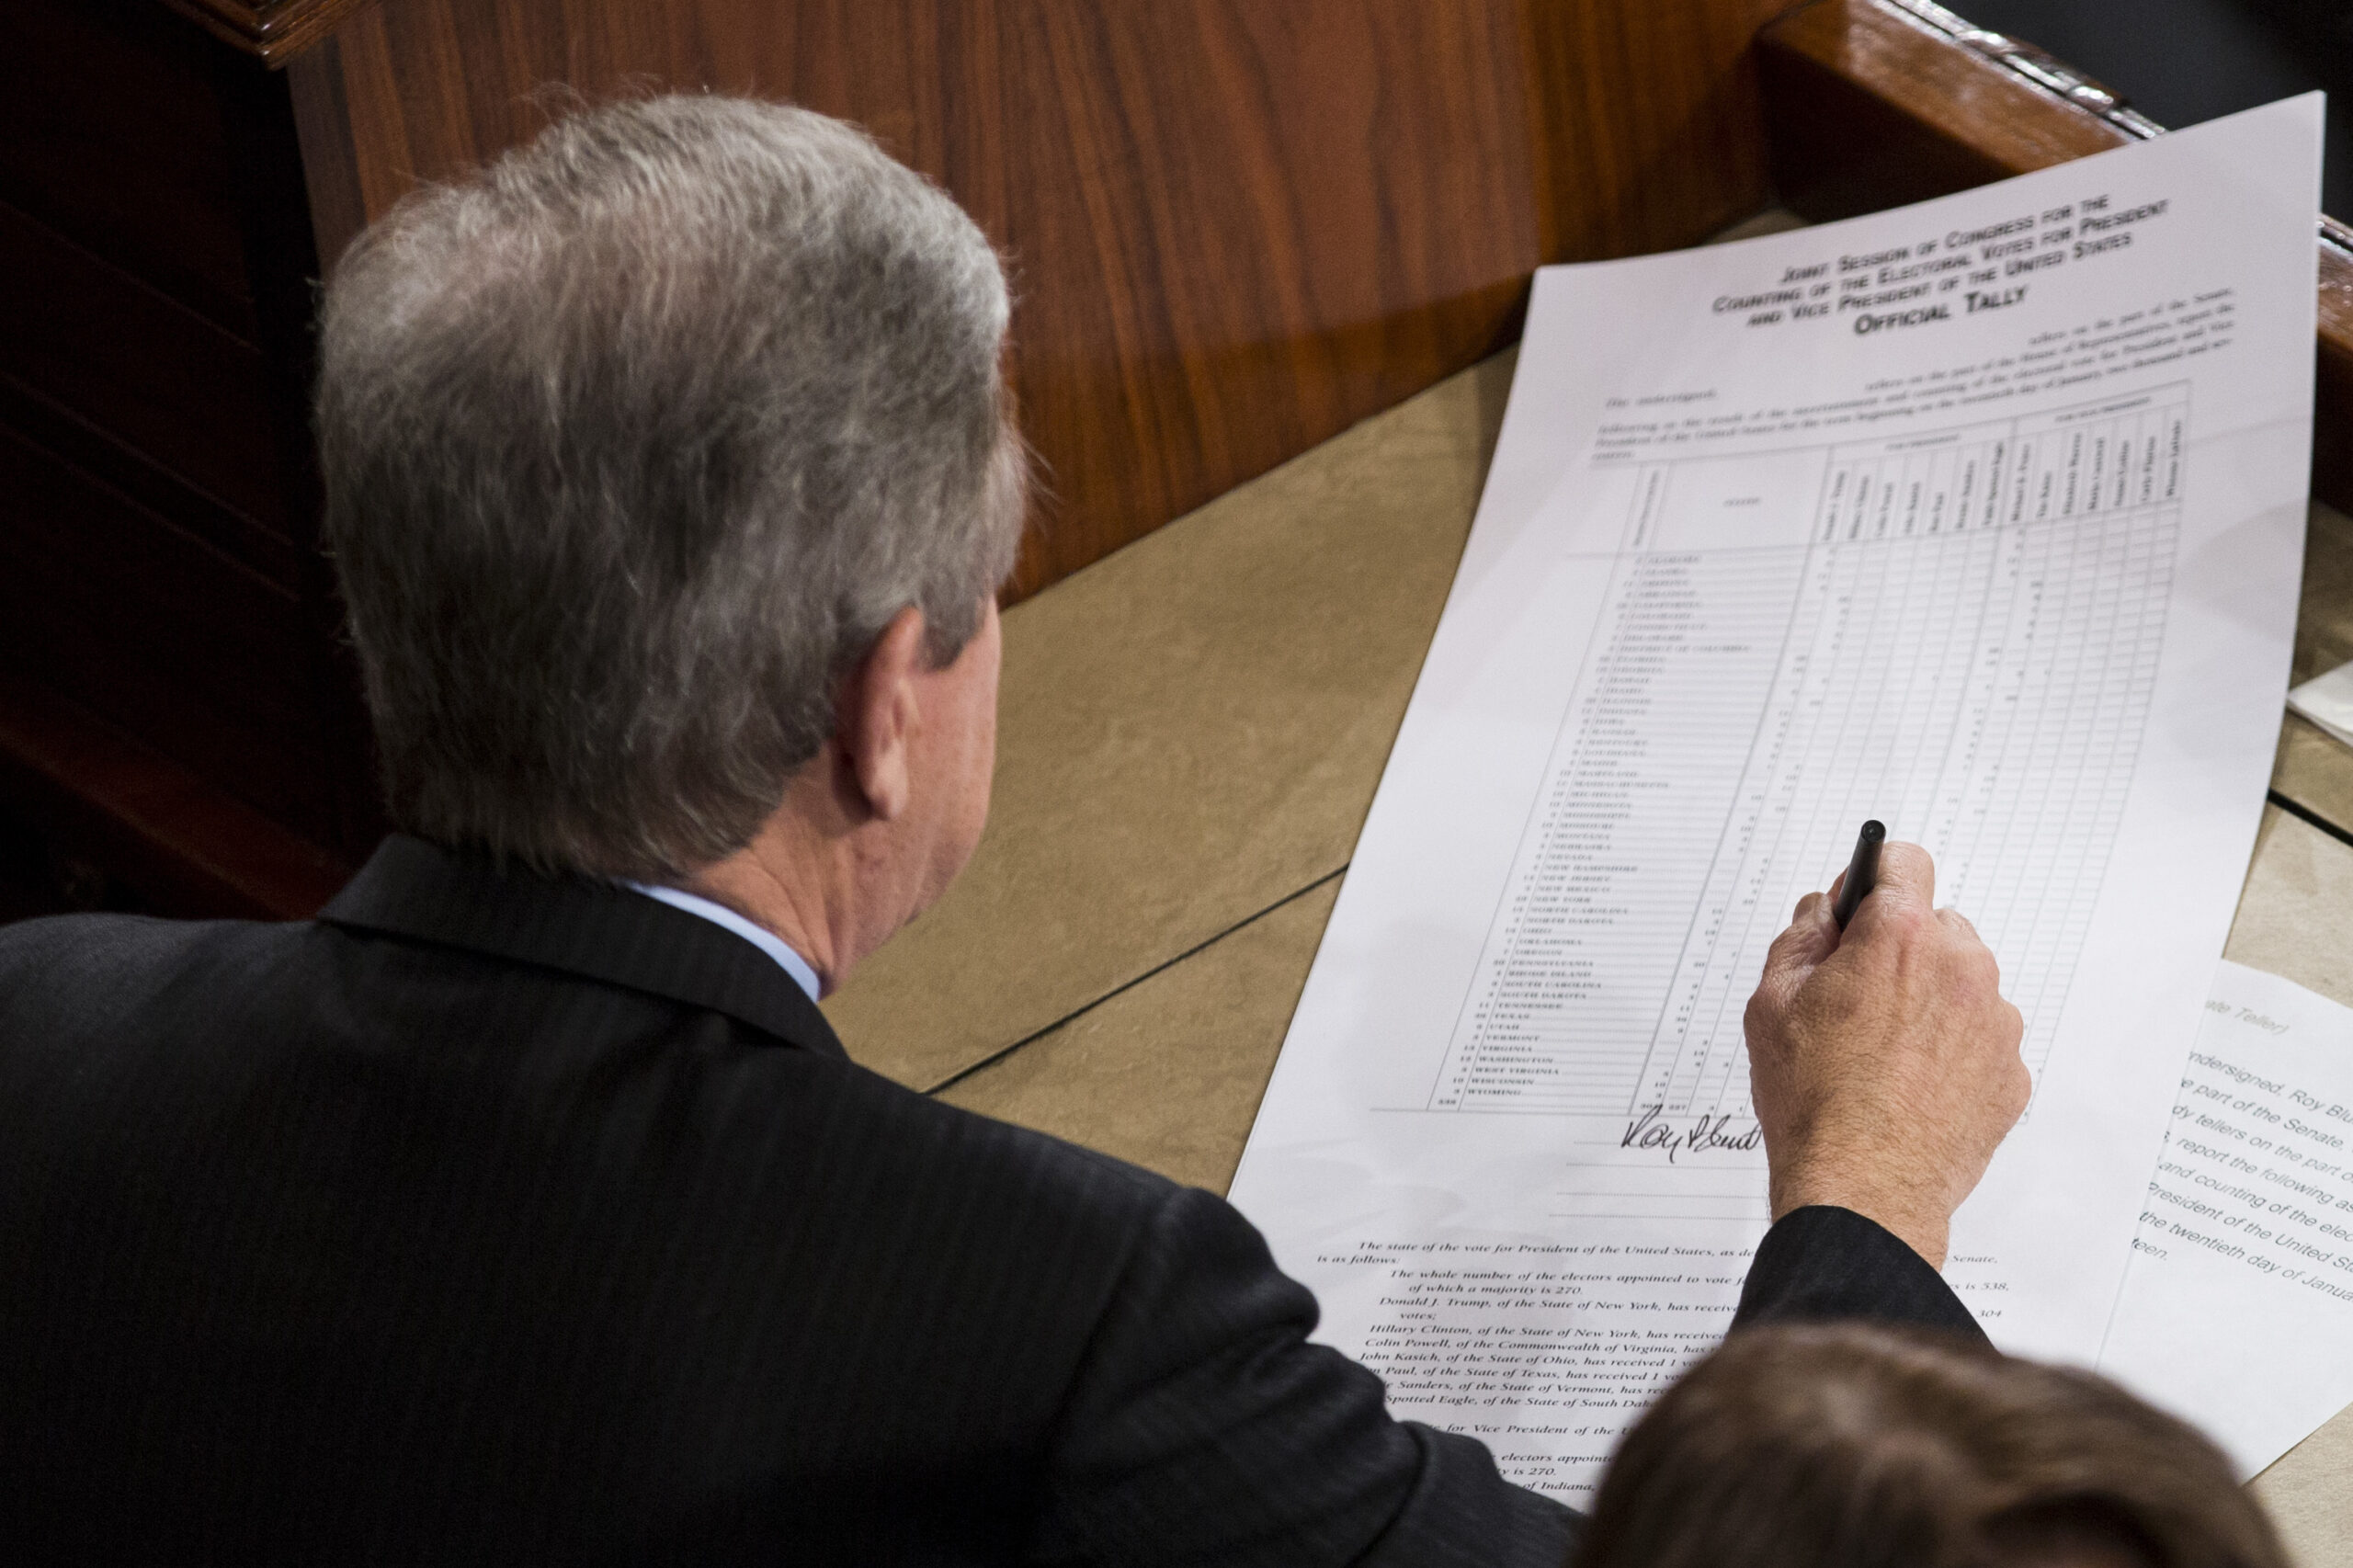 Sen. Roy Blunt, R-Mo., left, signs off on an official tally following a joint session of Congress to count Electoral College